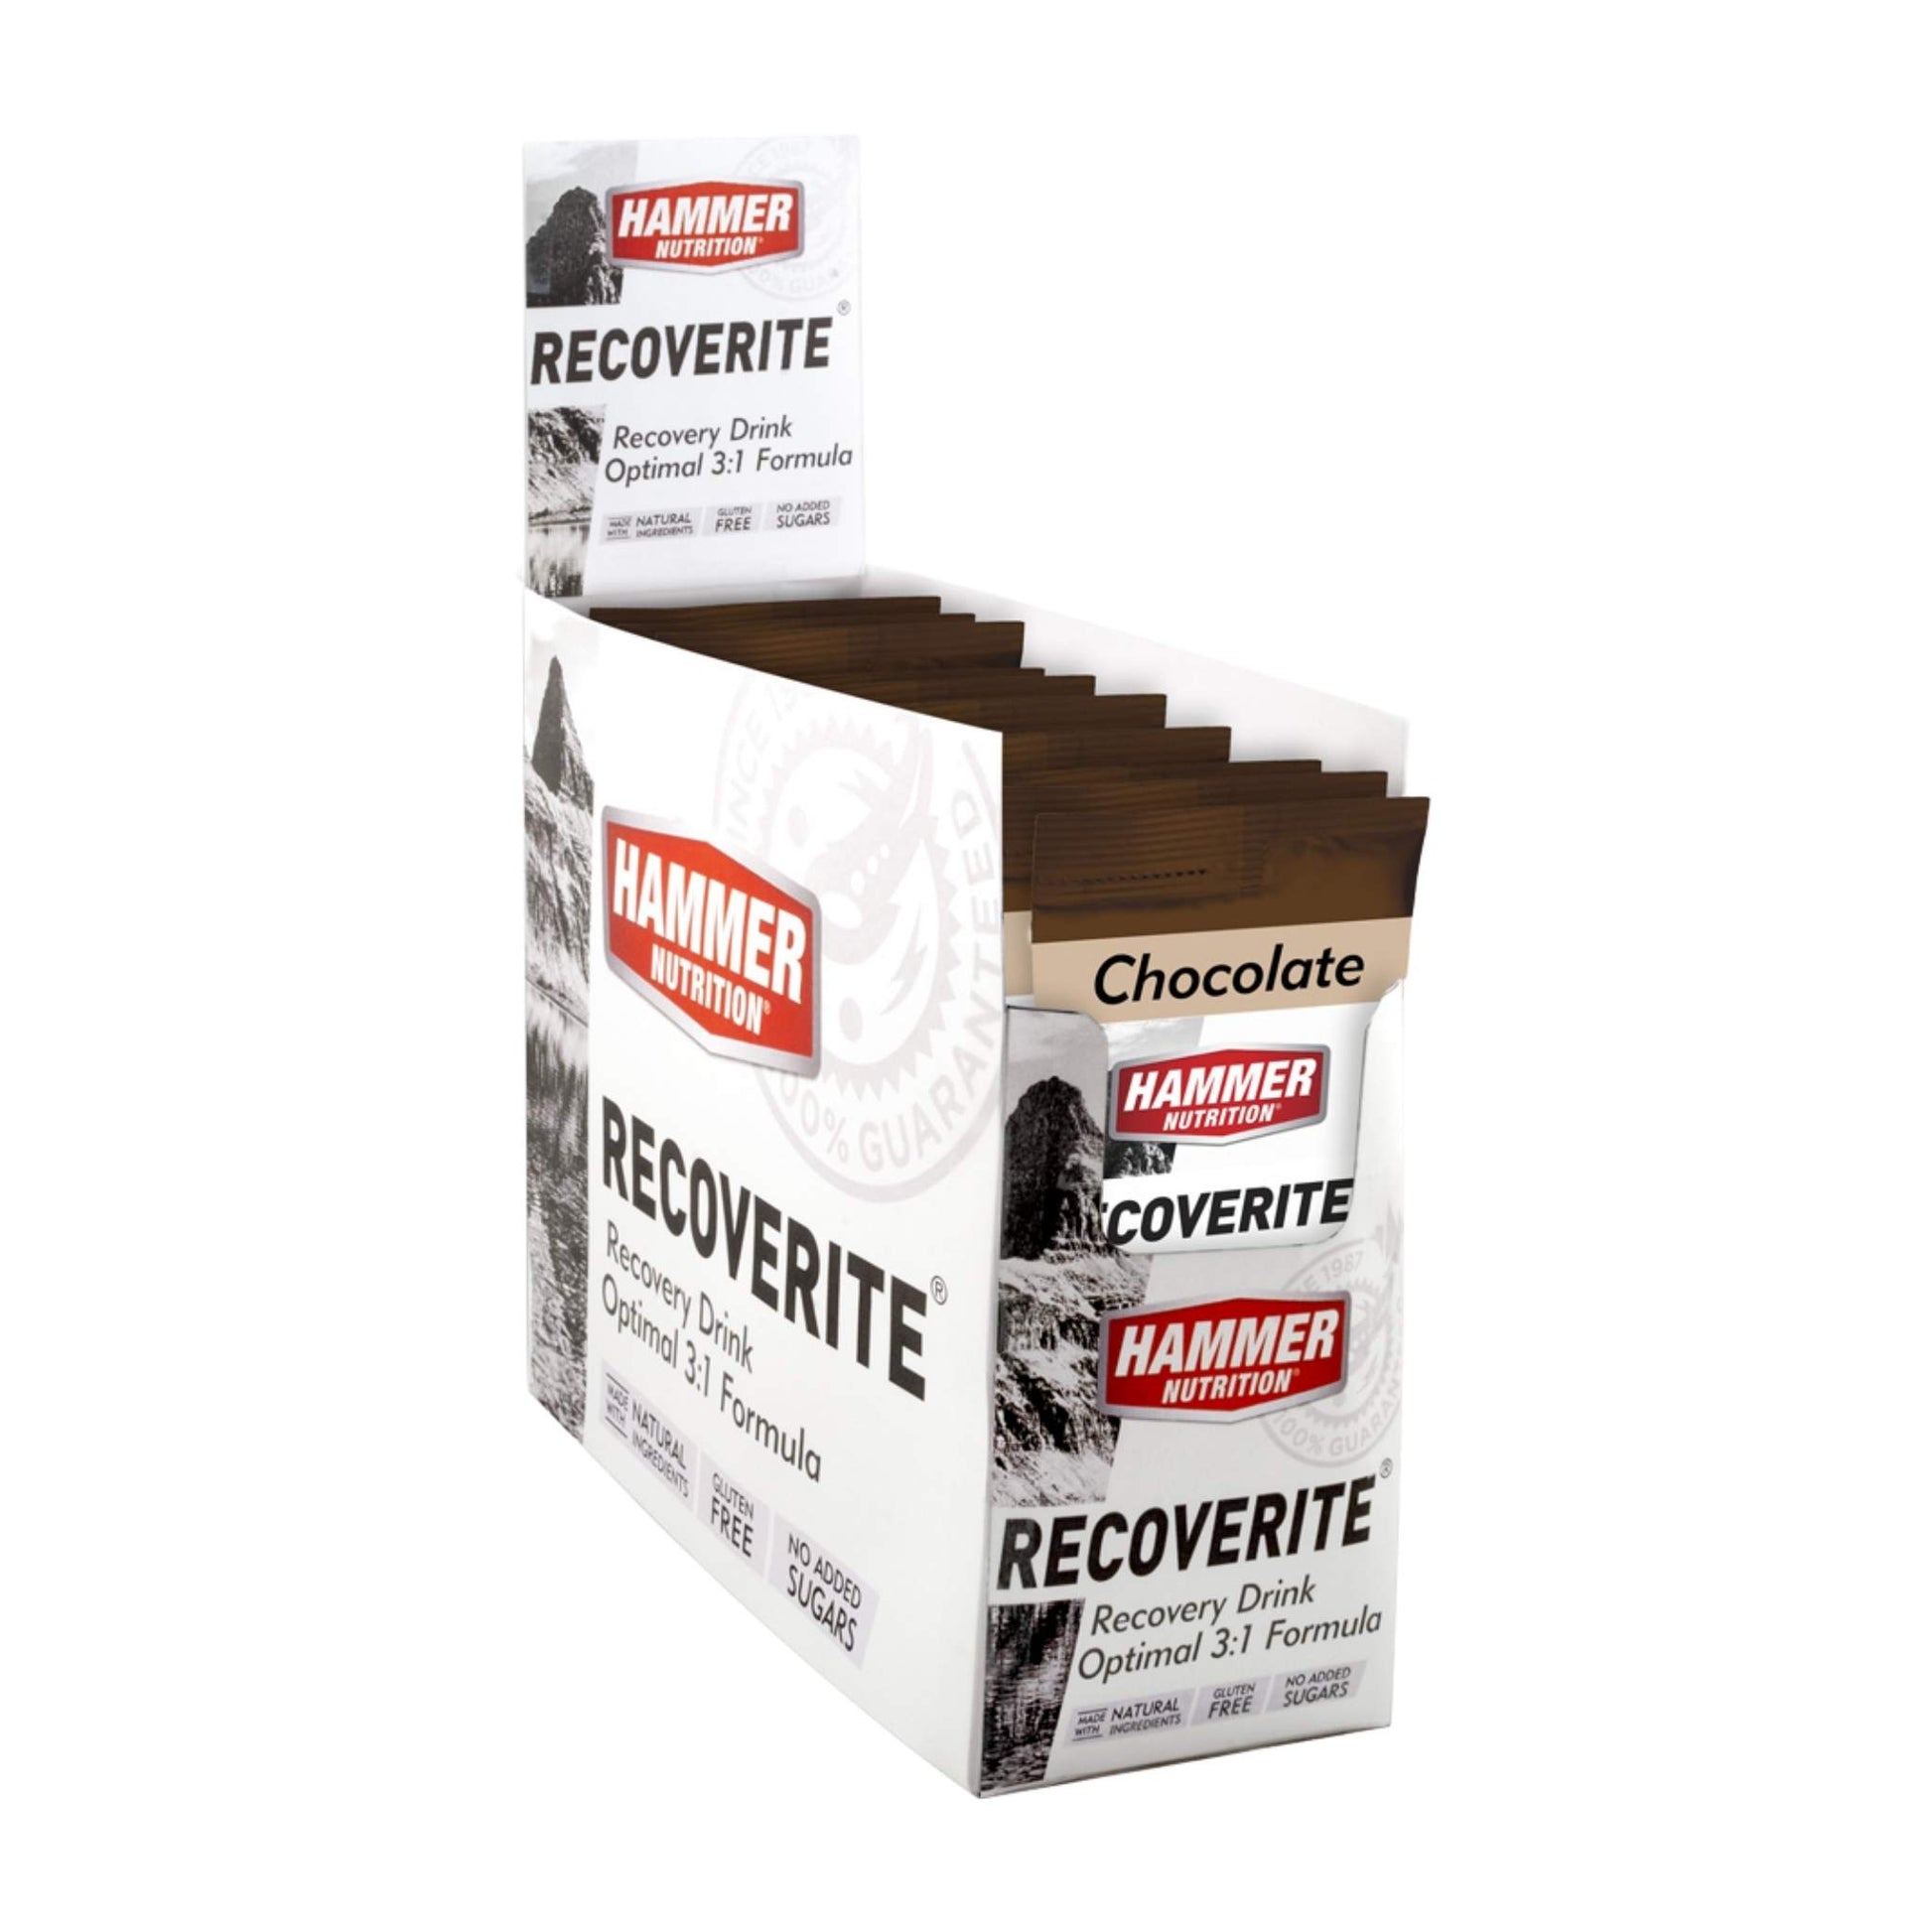 Performa - Recoverite, Chocolate, Box of 12 servings, Shown in packaging, Team Perfect